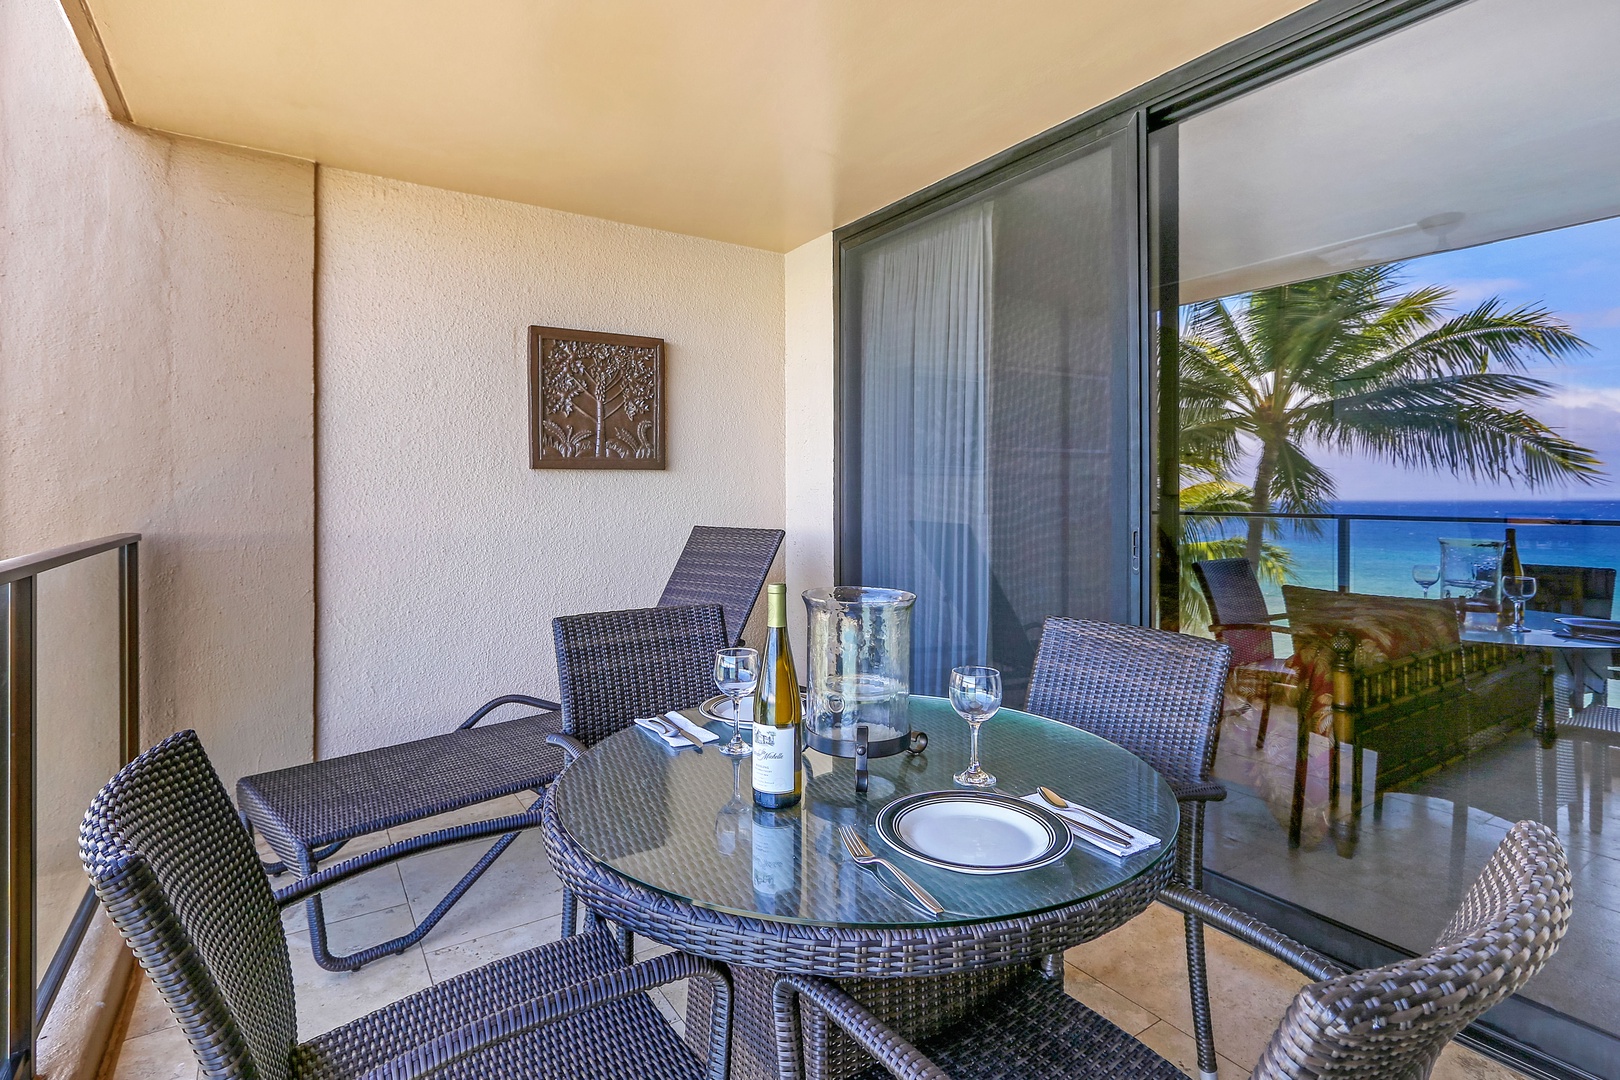 Lanai with ocean view and out door seating